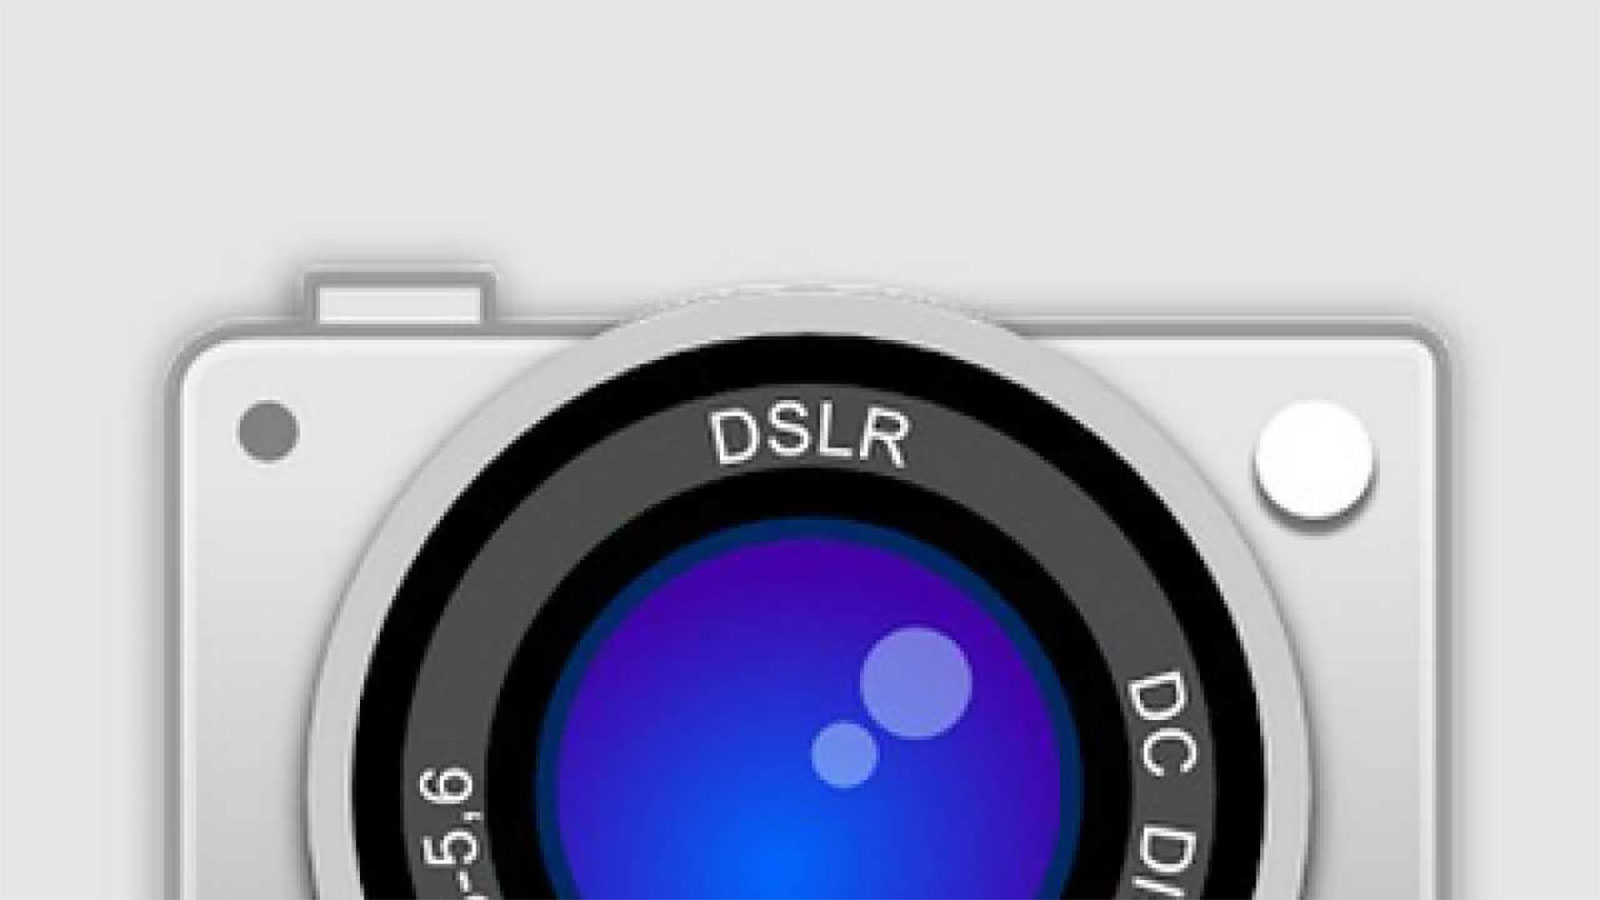 Download Camera Dslr Android